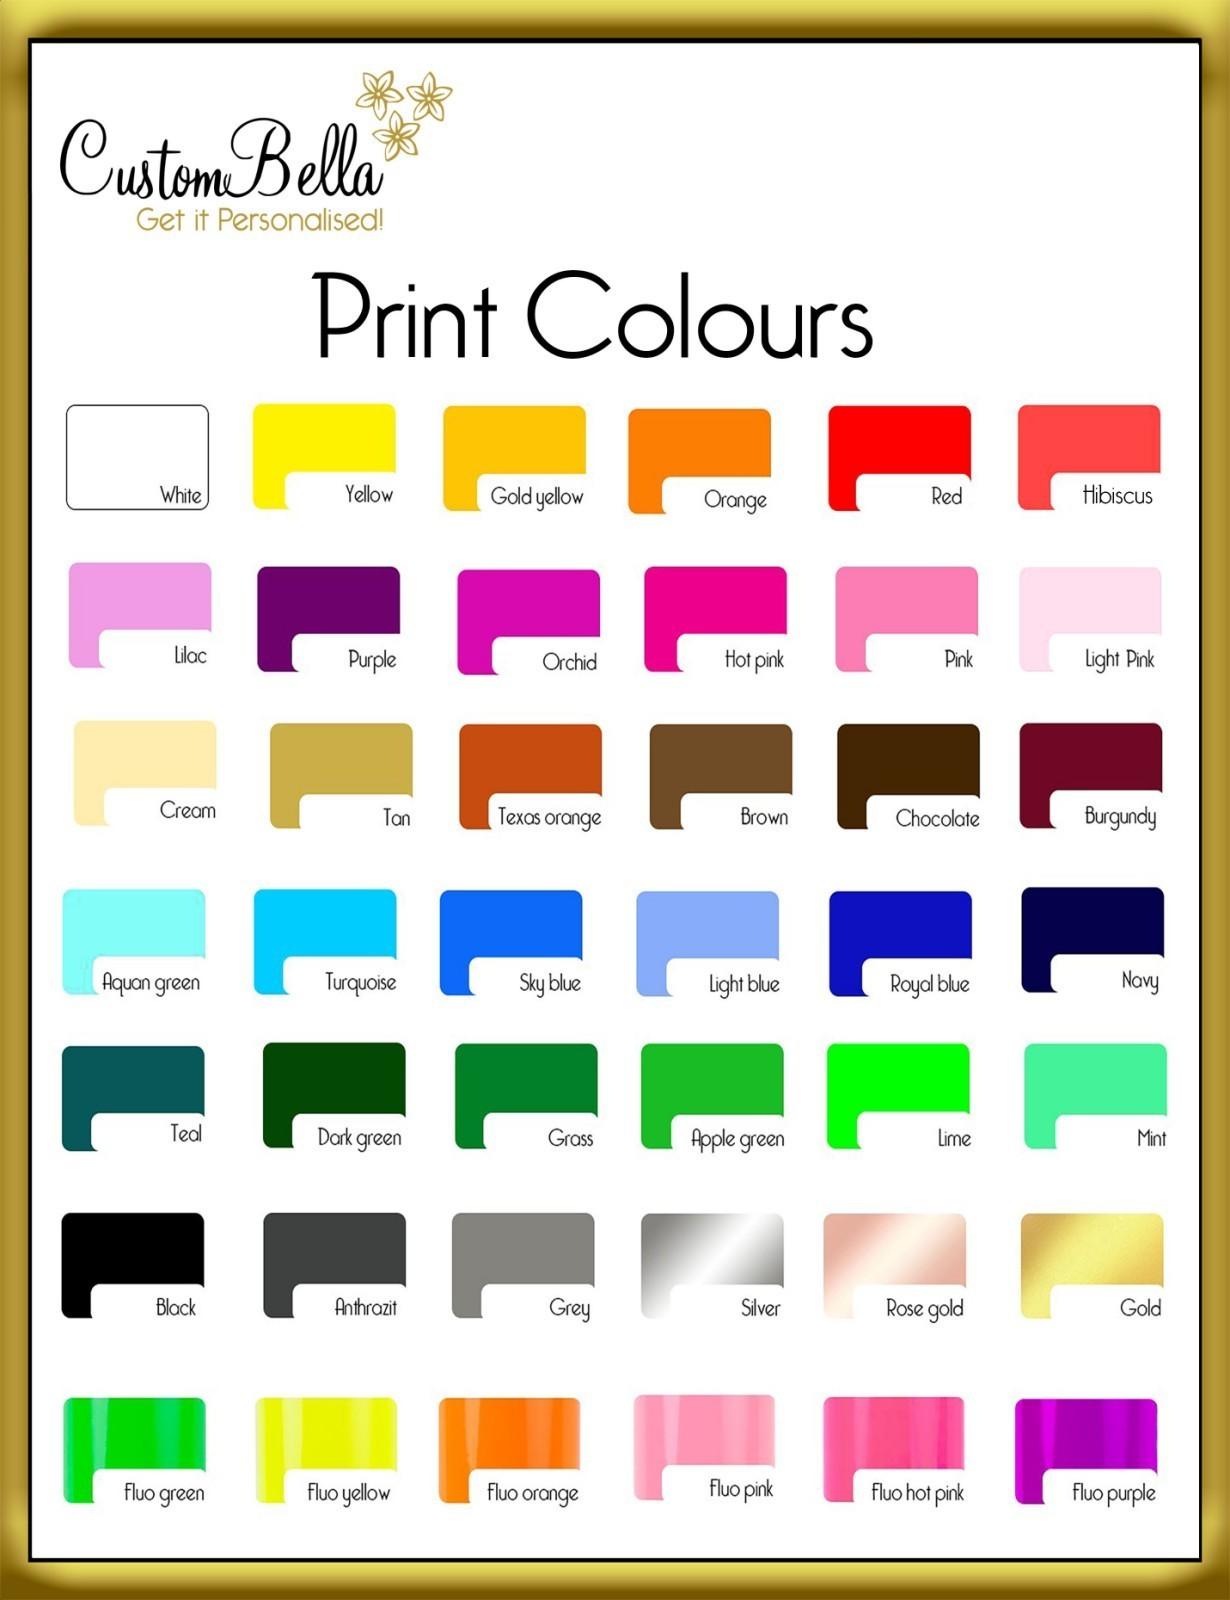 Print colours for printing on our aprons